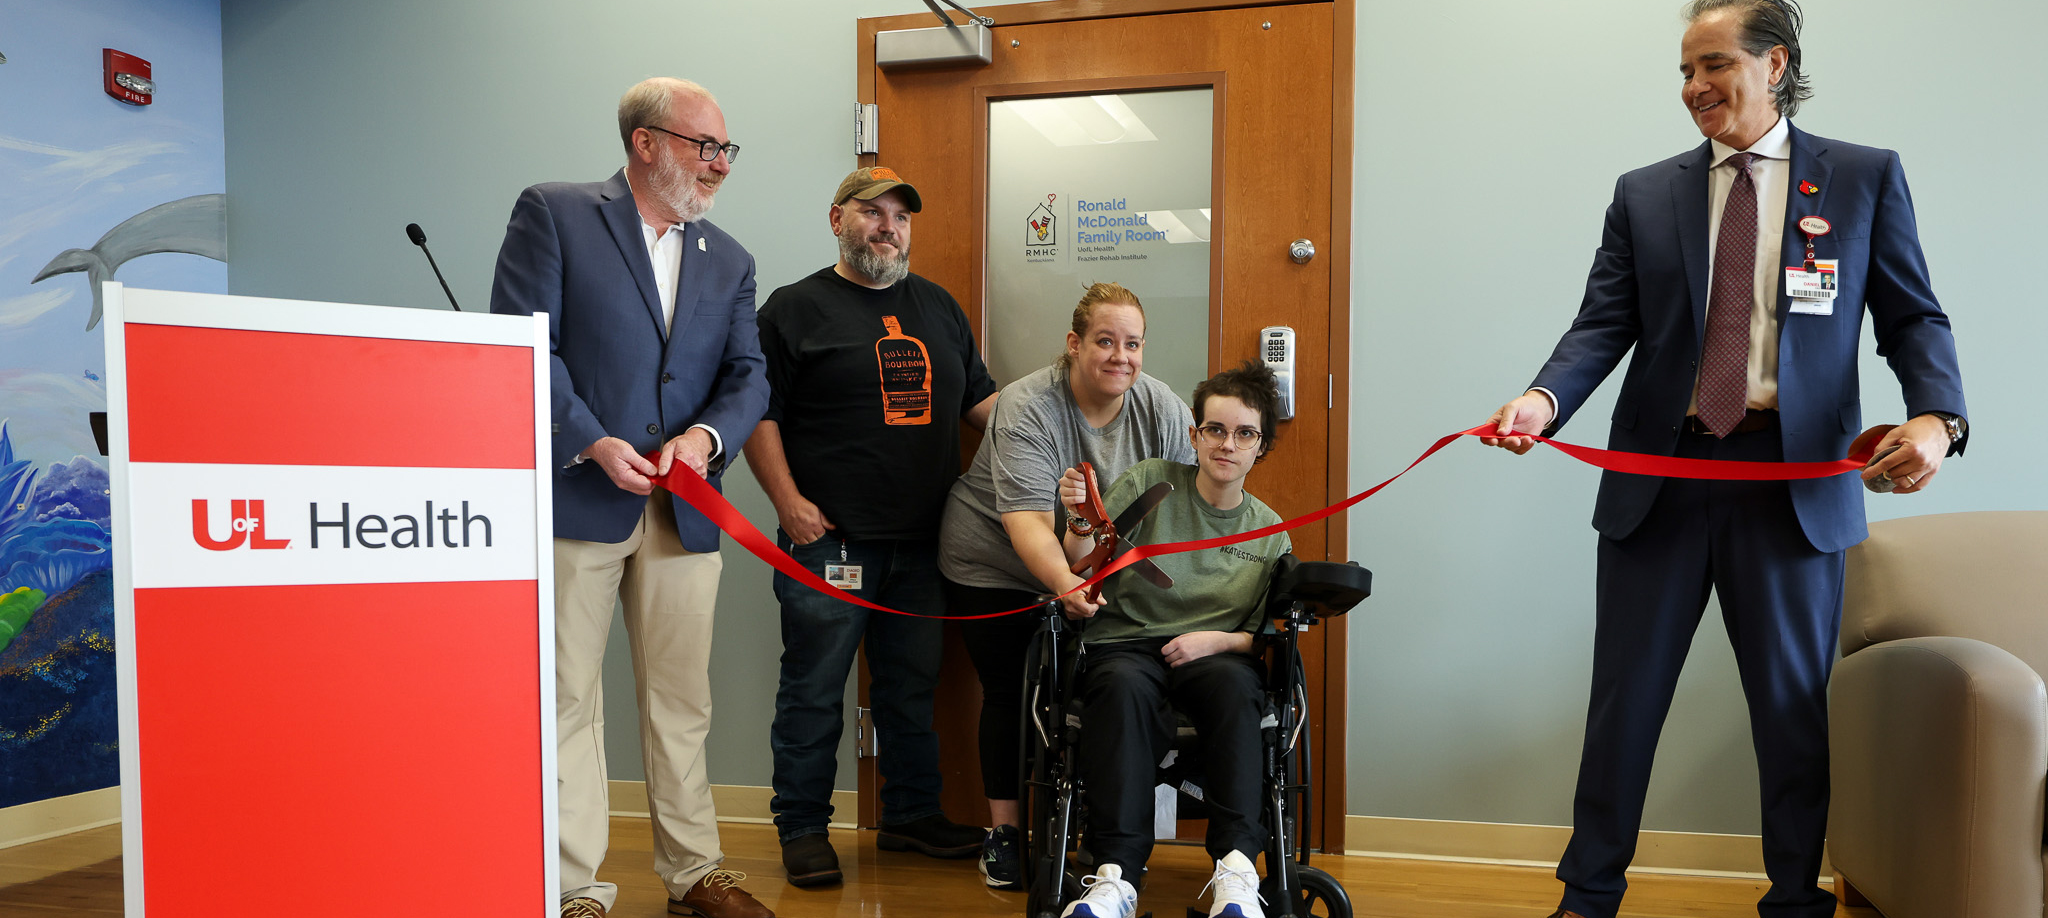 Five people participate in a ribbon-cutting ceremony for the Ronald McDonald House Charities of Kentuckiana Family Room Program at UofL Health – Frazier Rehabilitation Institute. Two individuals are standing at a podium with a UofL Health logo, while a person in a wheelchair holds scissors cutting a red ribbon, flanked by two others.